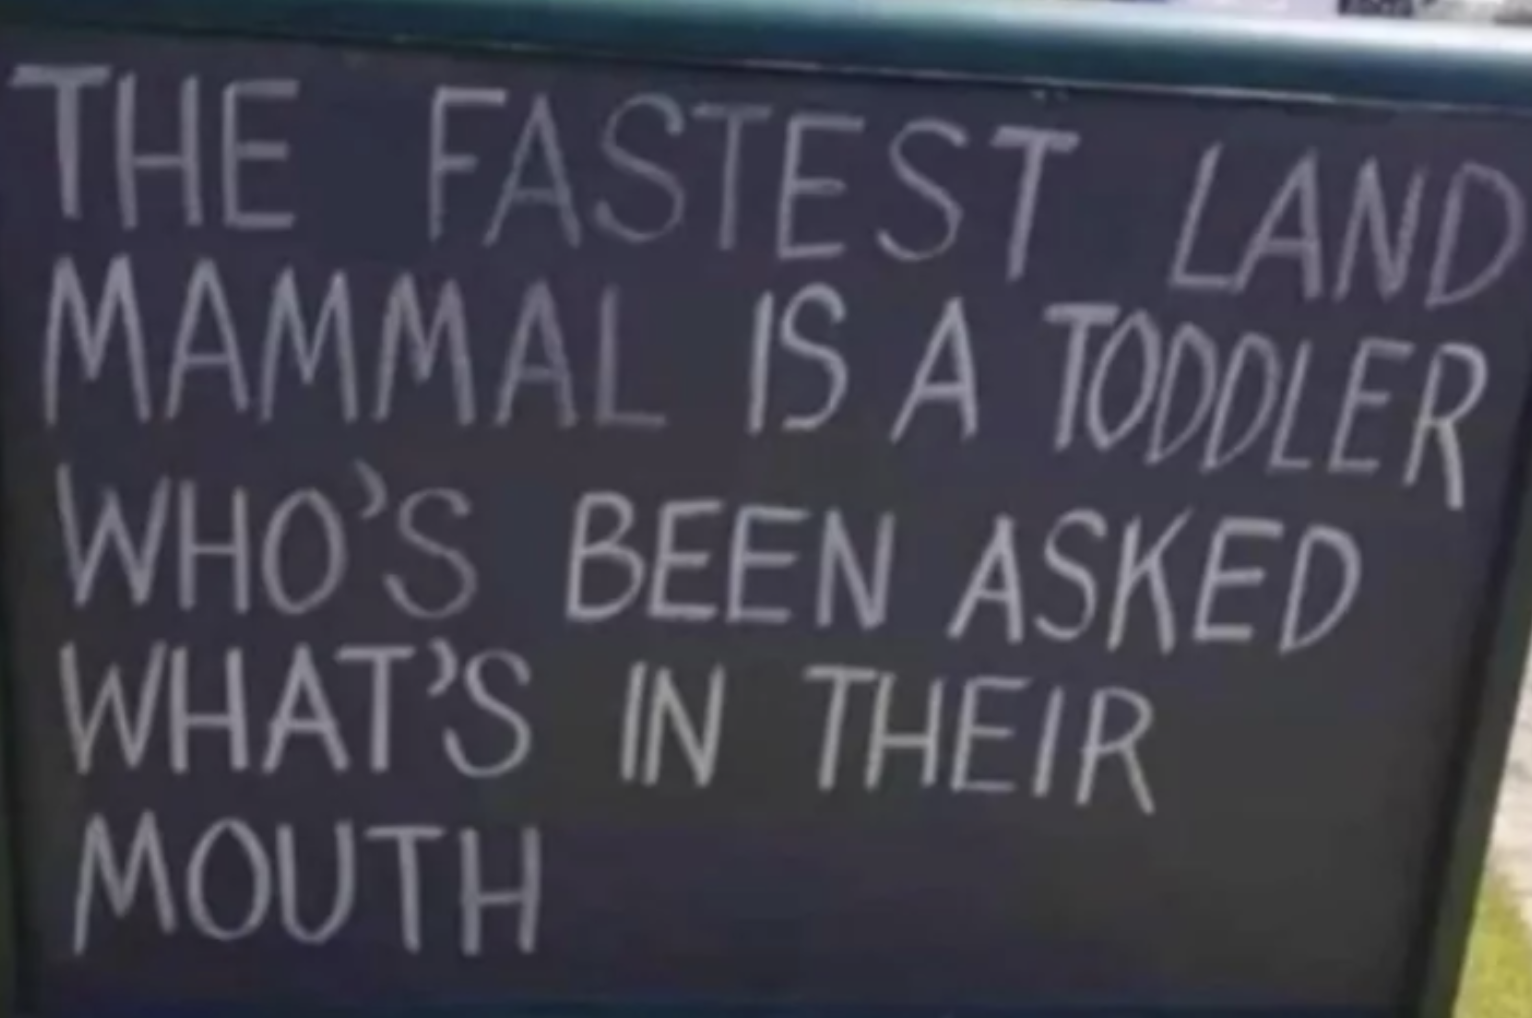 the fastest land mammal is a toddler who&#x27;s been asked what&#x27;s in their mouth